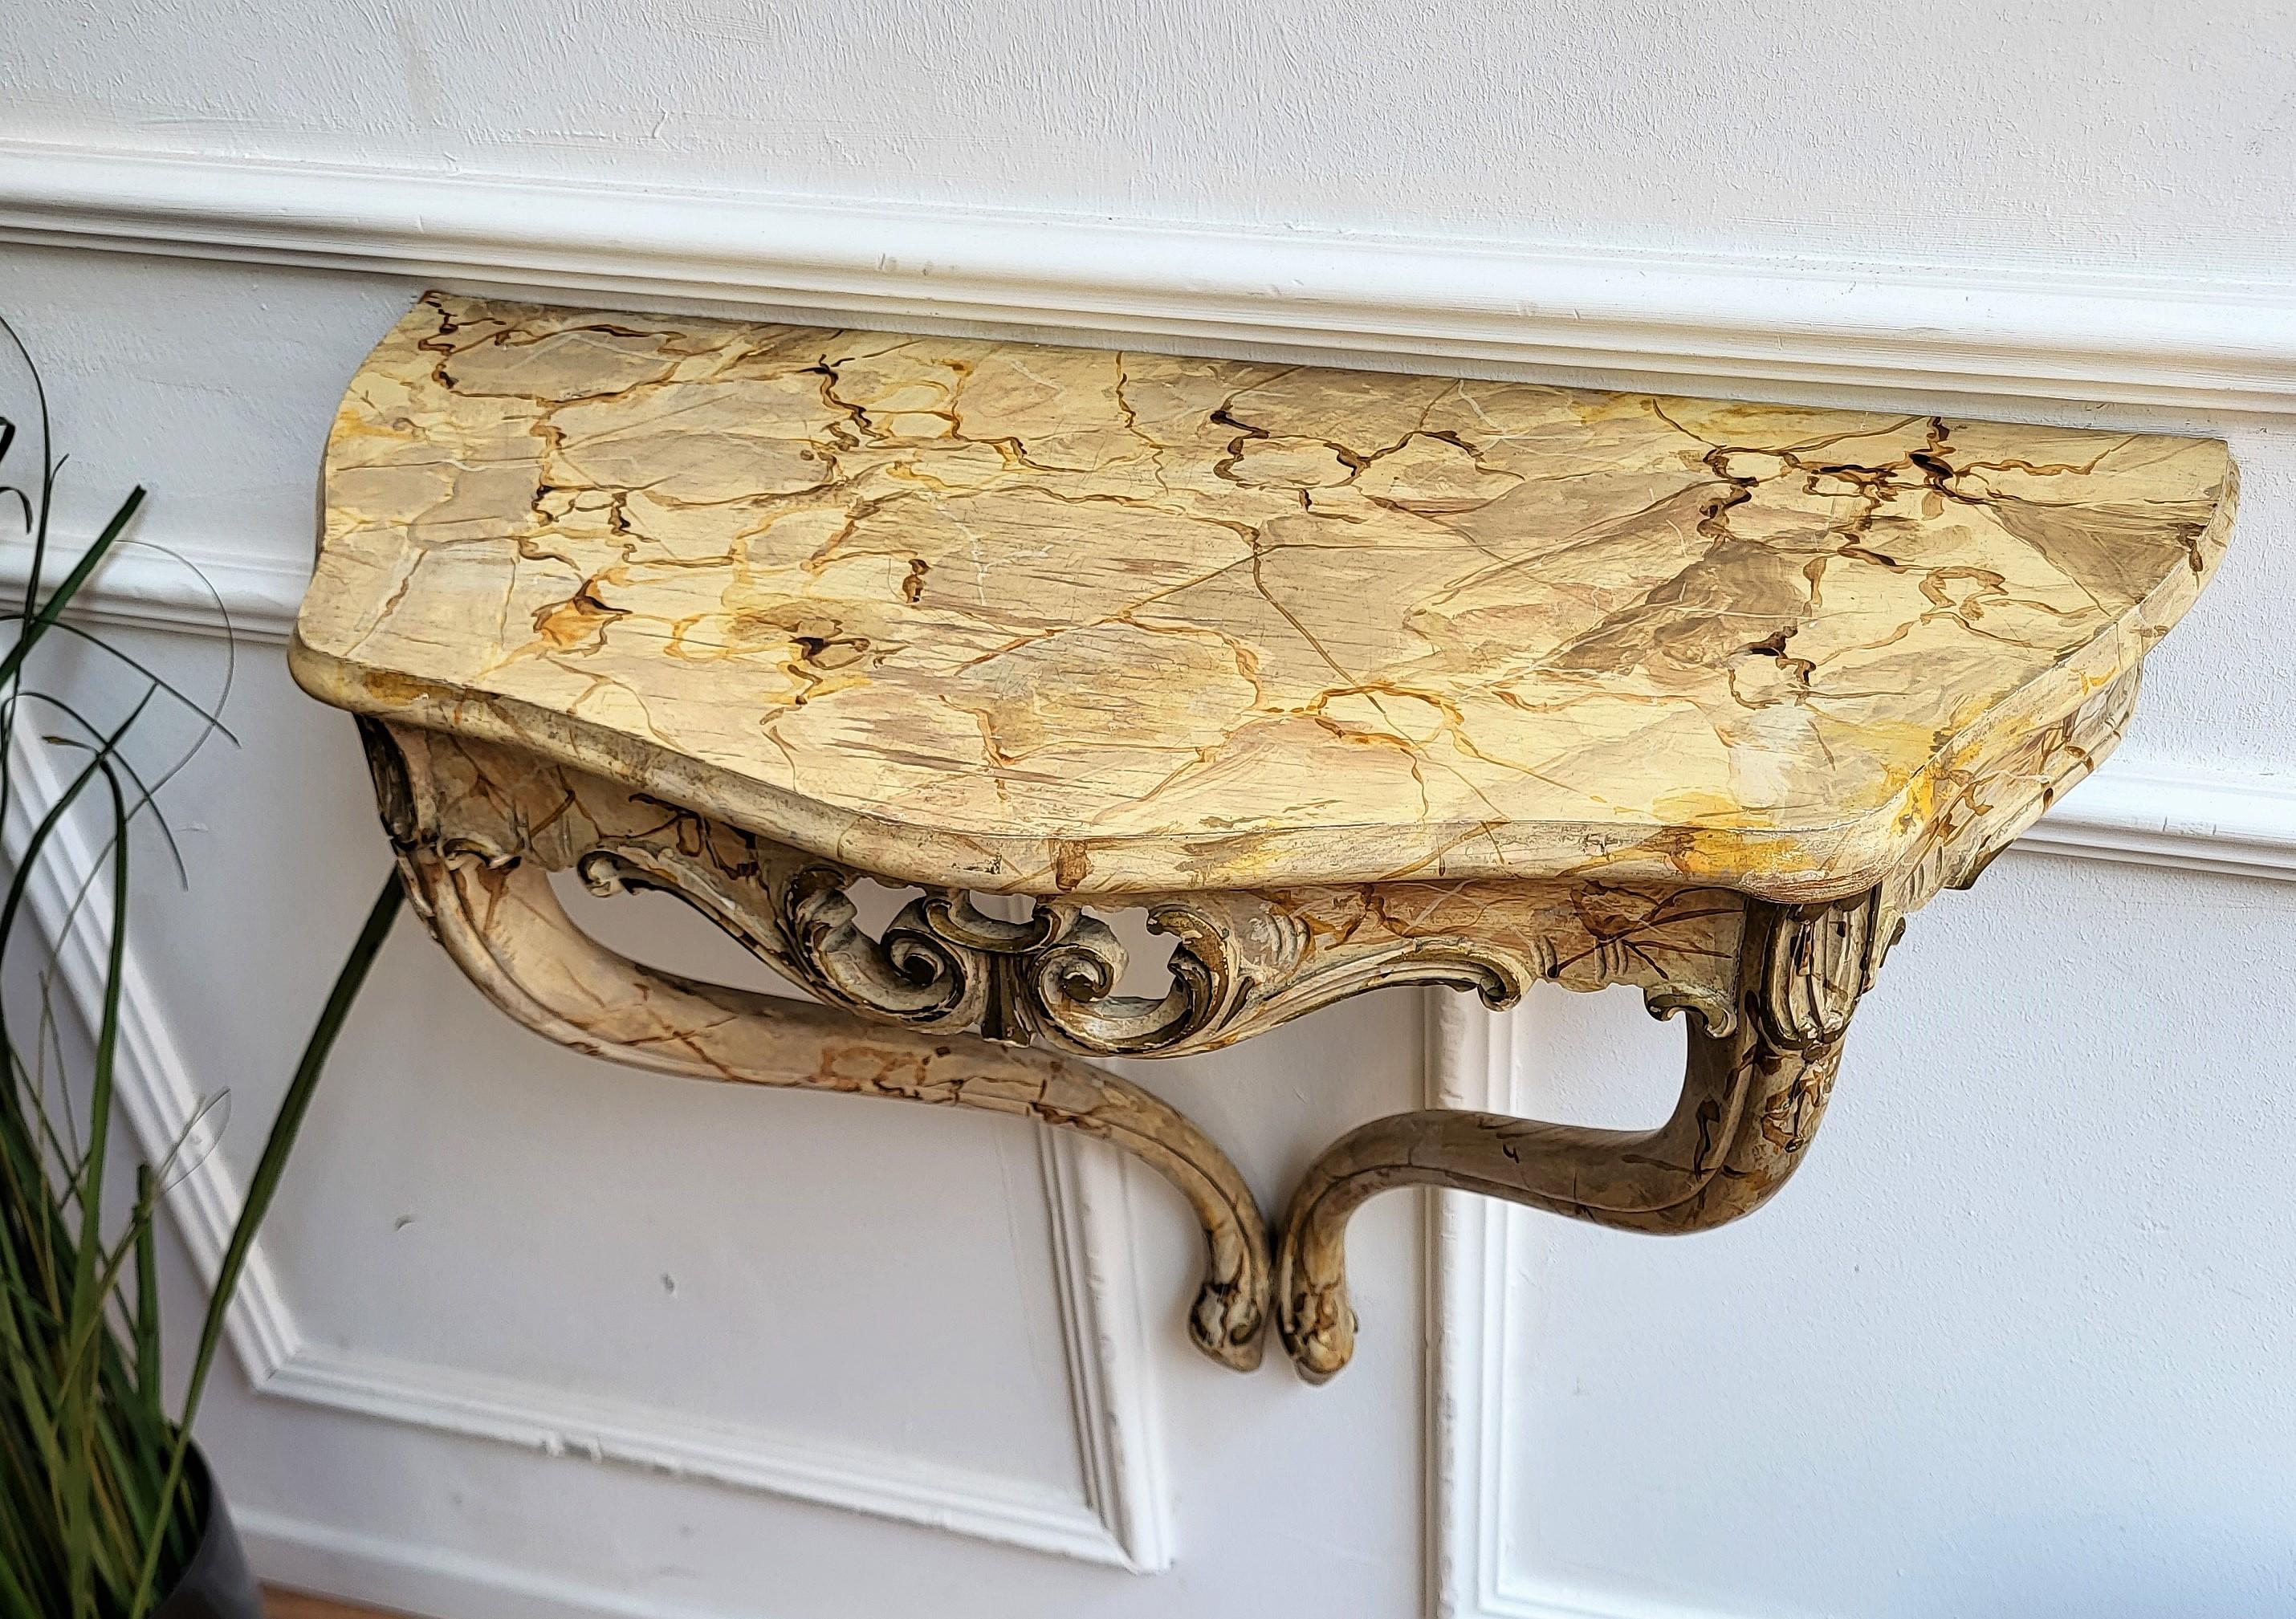 Italian Baroque Wooden Carved Painted Wall Mounted Console Table Shelf For Sale 1